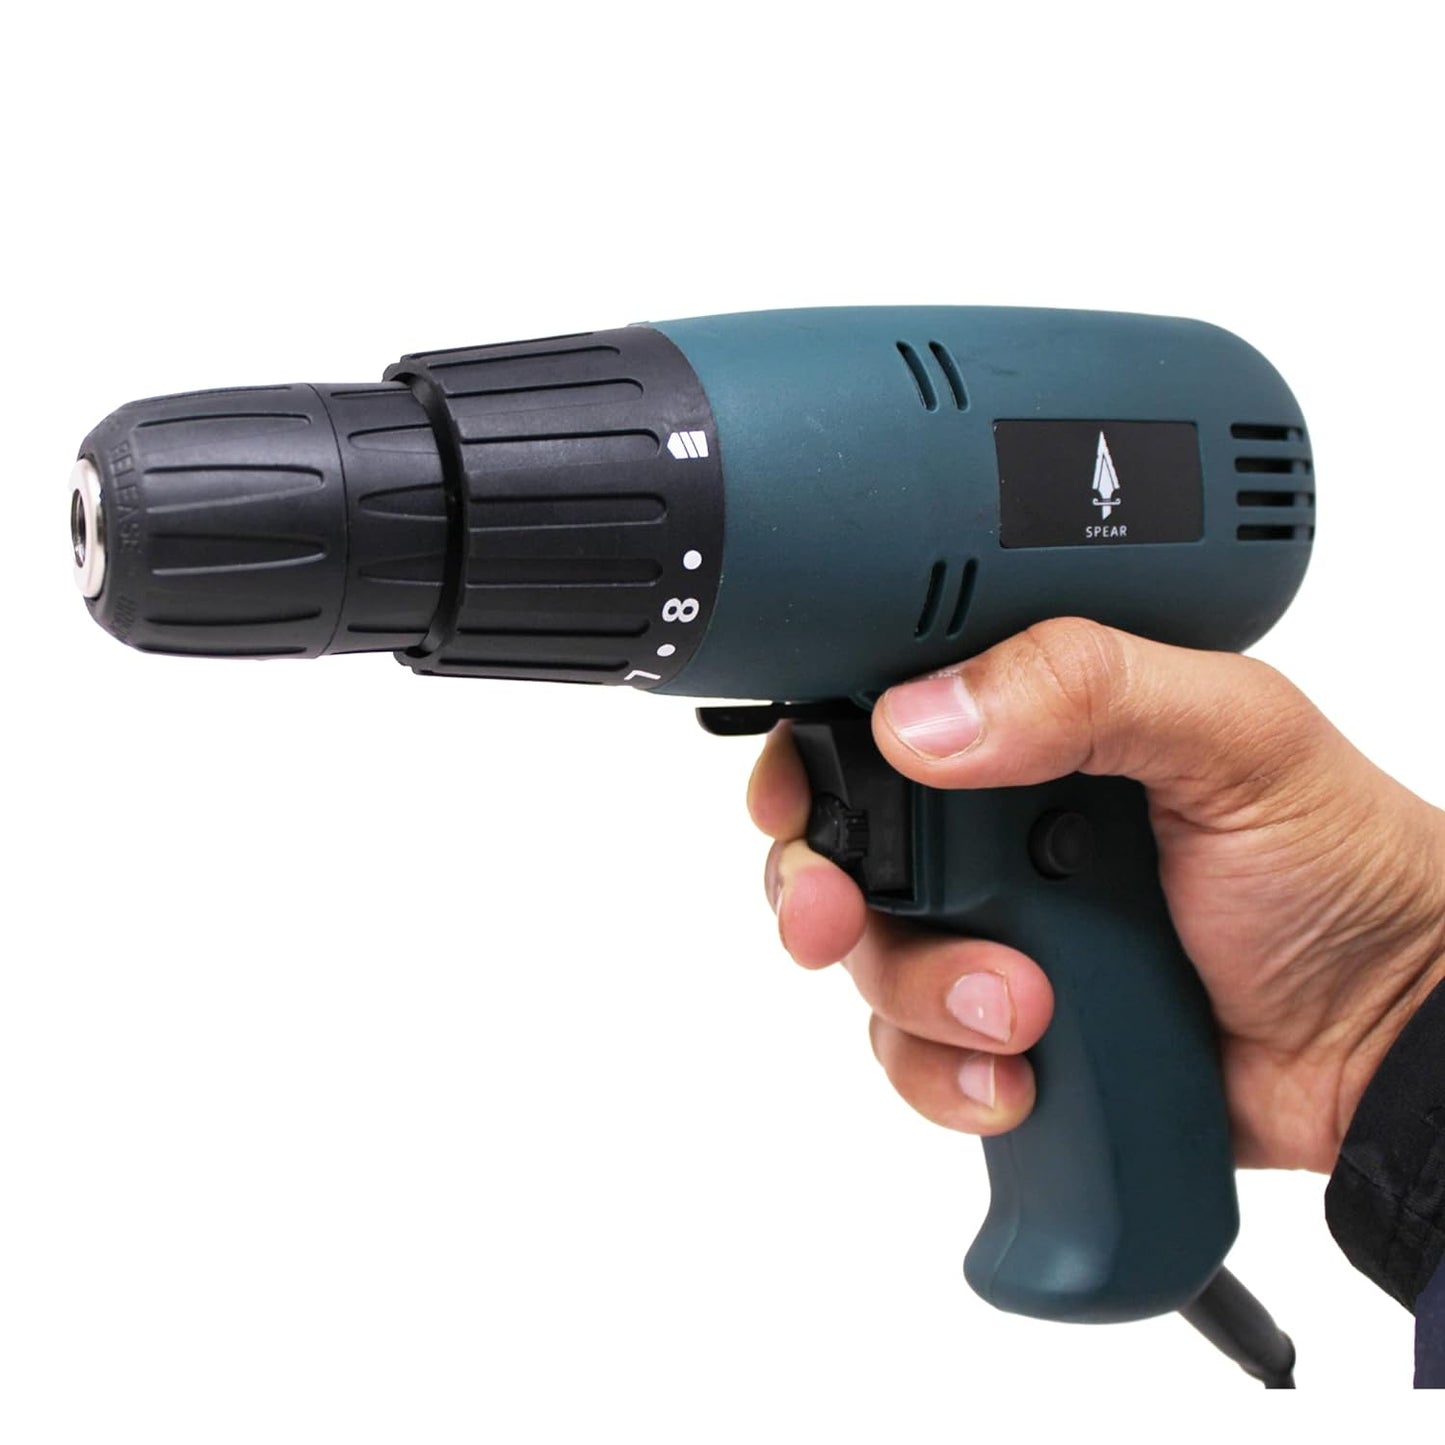 SPEAR SD01 10mm Forward Reversible Variable Speed Screwdriver/Drill Machine (450W, 750Rpm)